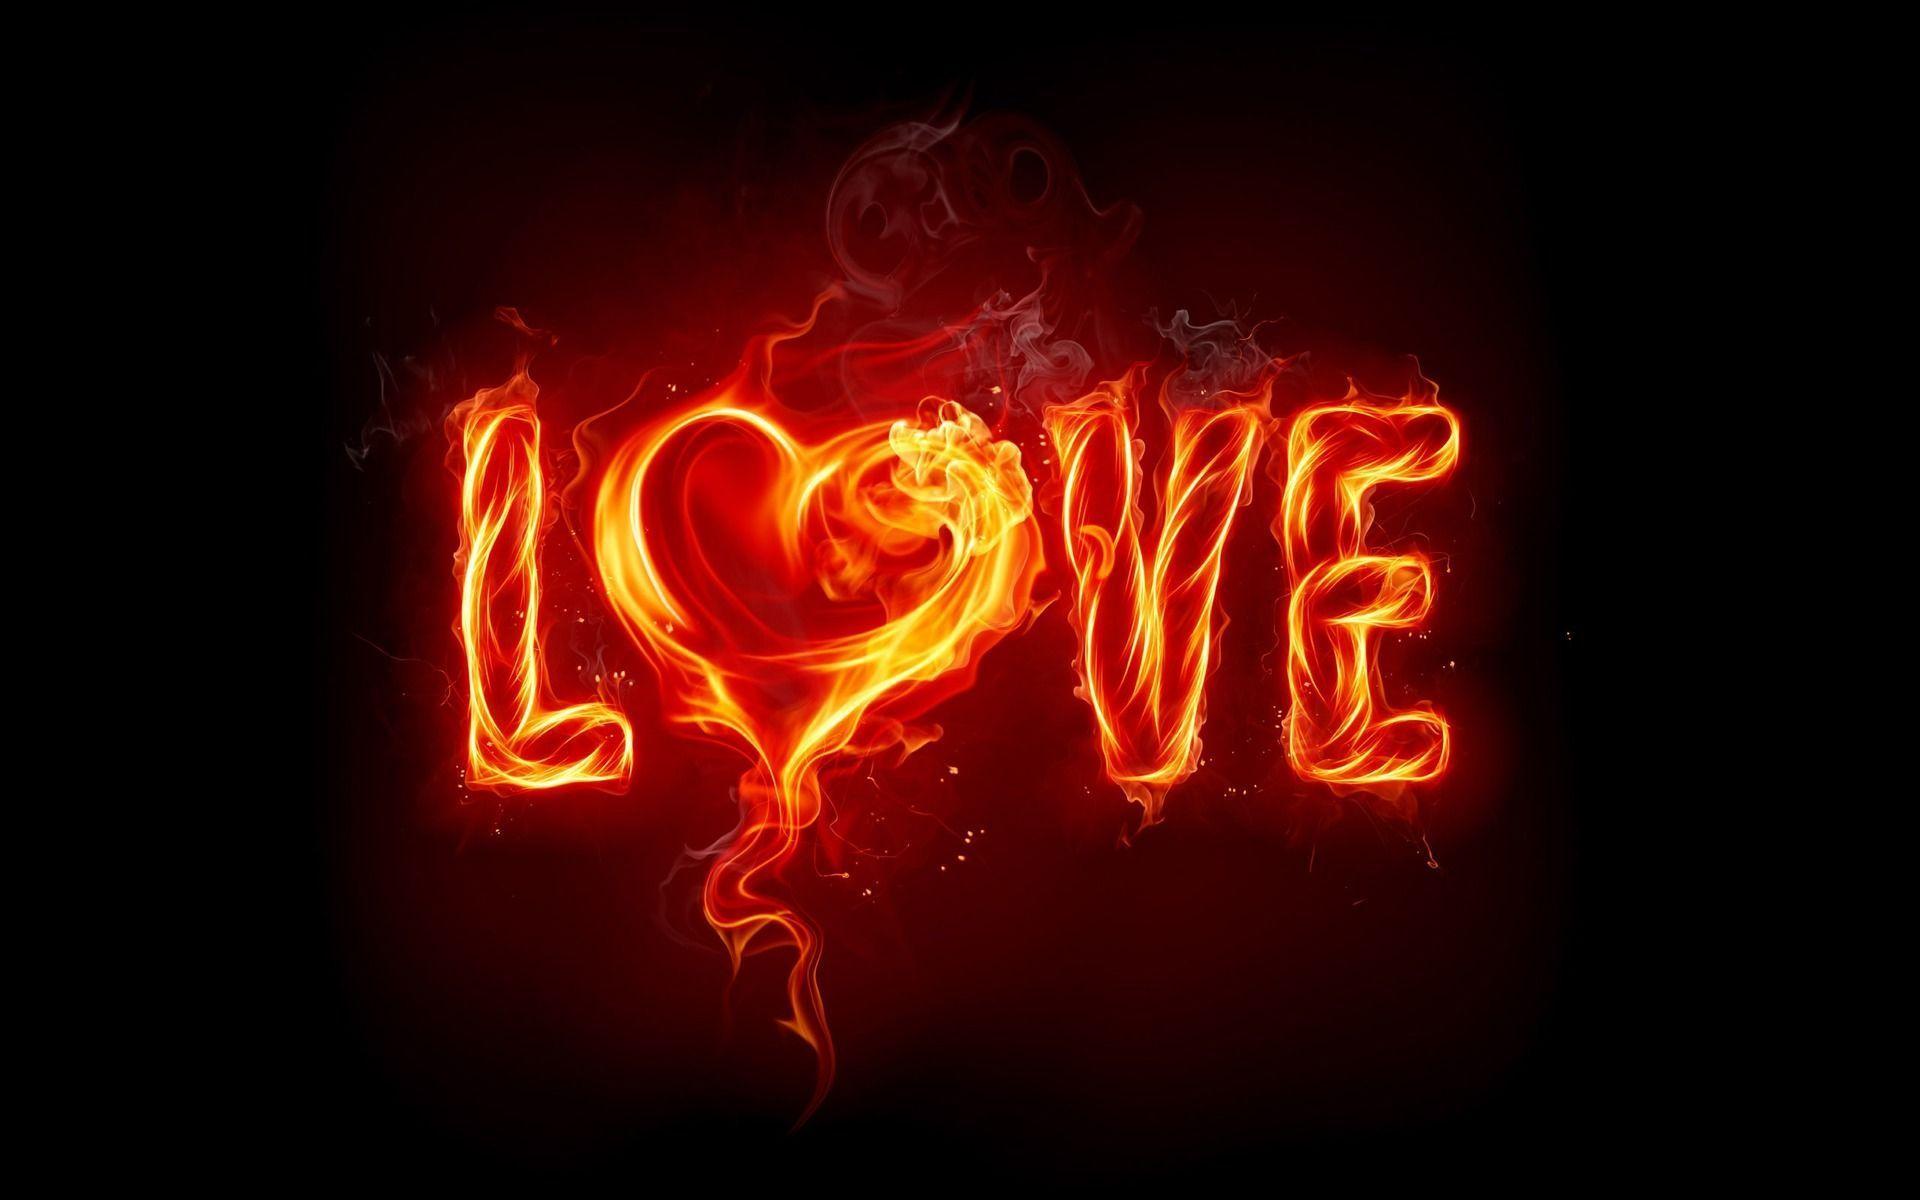 Love in Flames 2014 Valentines Day Wallpaper Wide or HD. Holidays